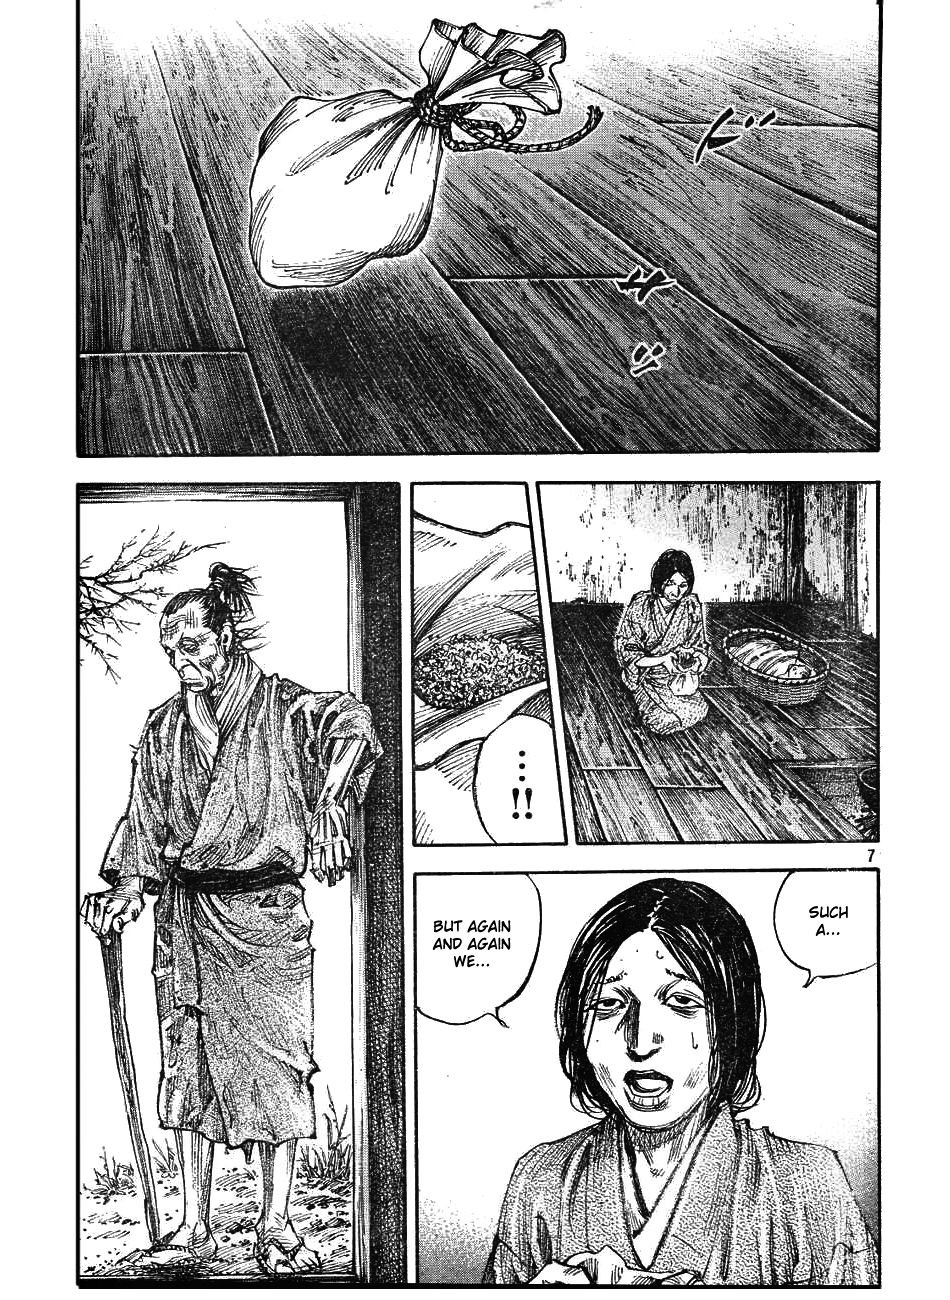 Vagabond chapter 311 page 6